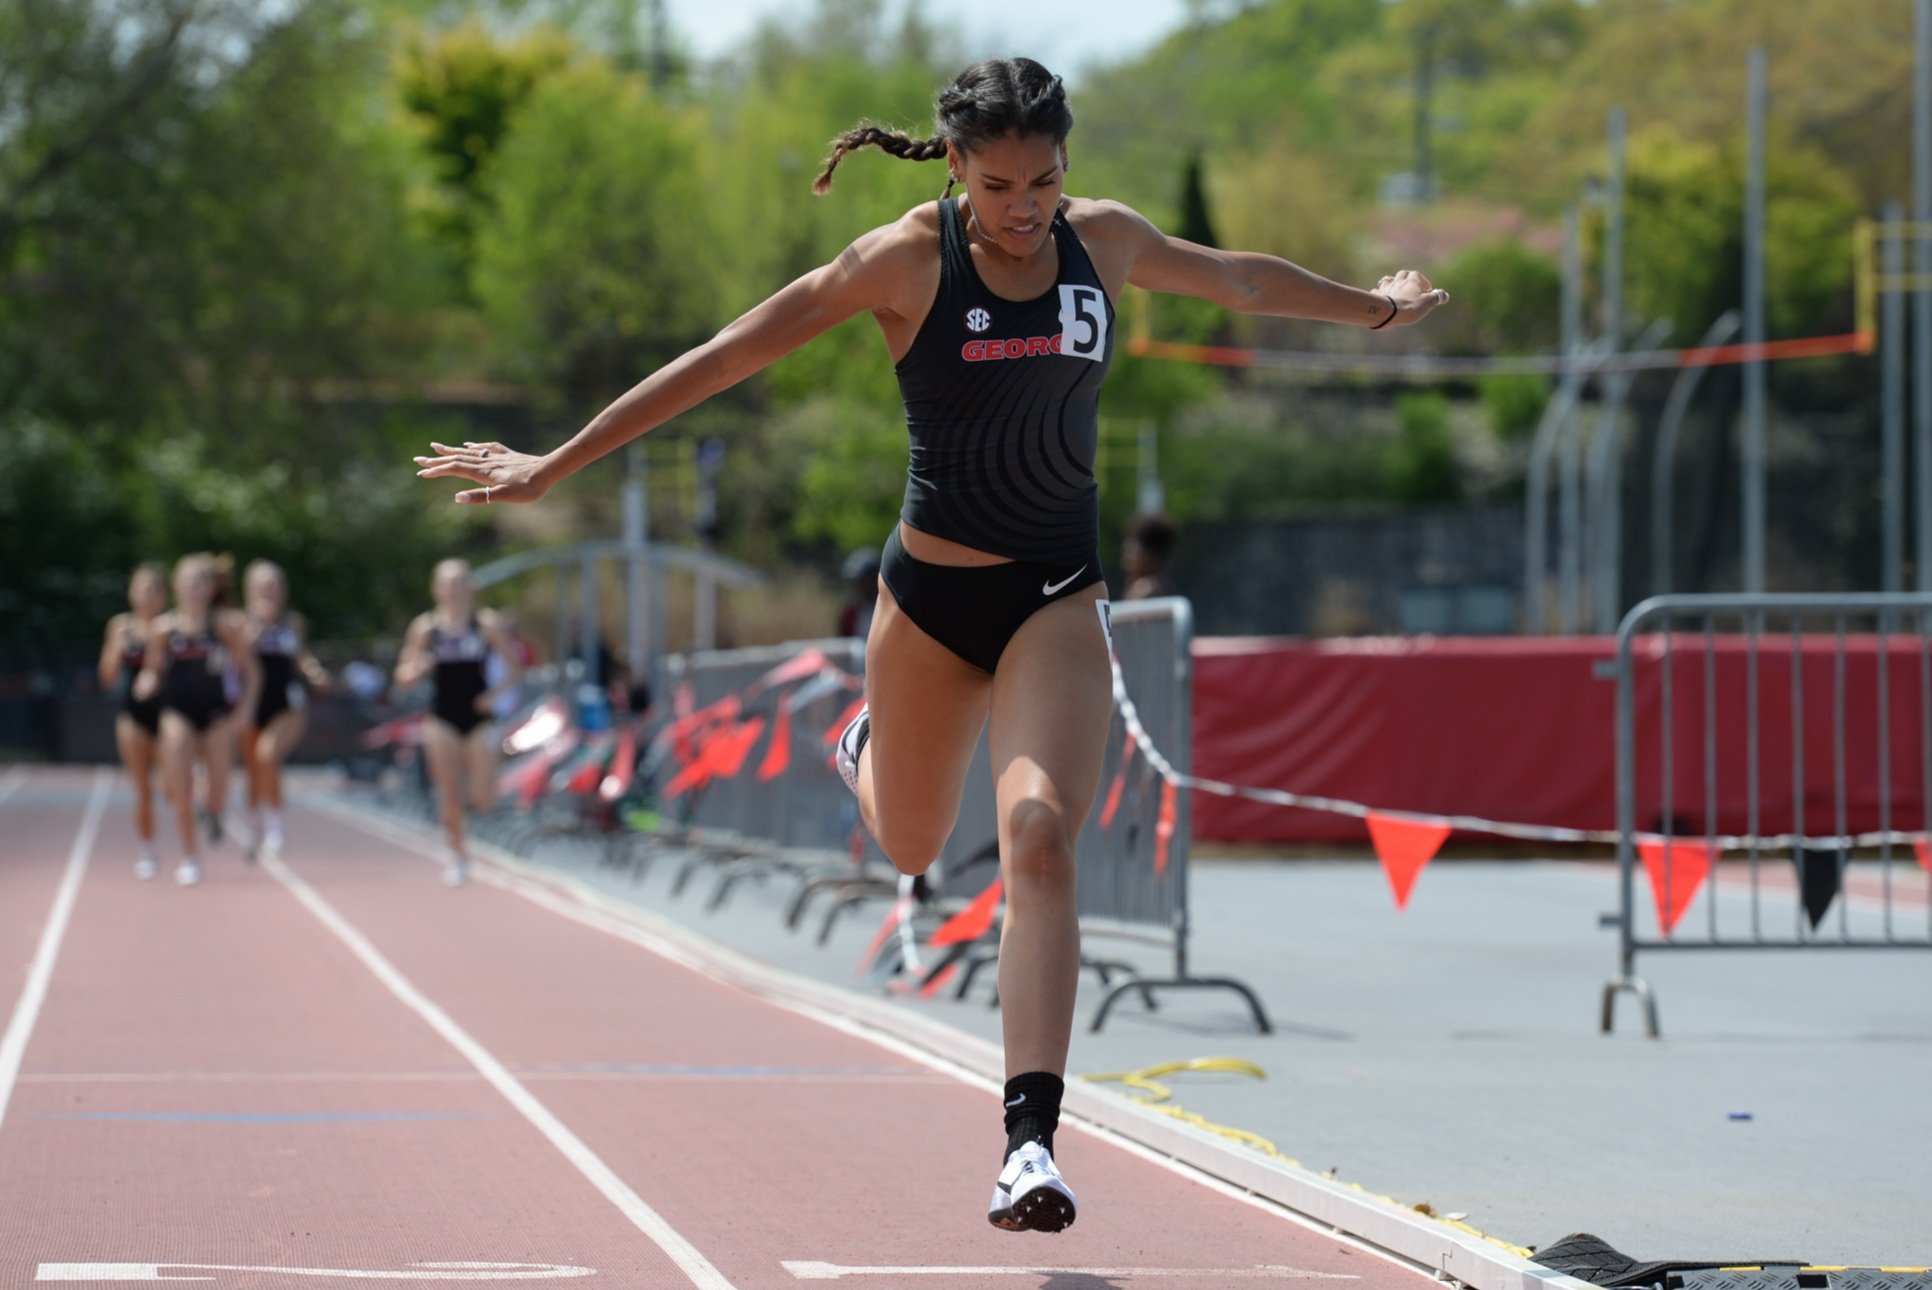  Georgia’s Amber Tanner crosses the finish line during an invitational at the Speck Towns Track on Apr. 6, 2019 in Athens, Georgia. Tanner placed first in the 800 meter race. (Photo/Julian Alexander) 